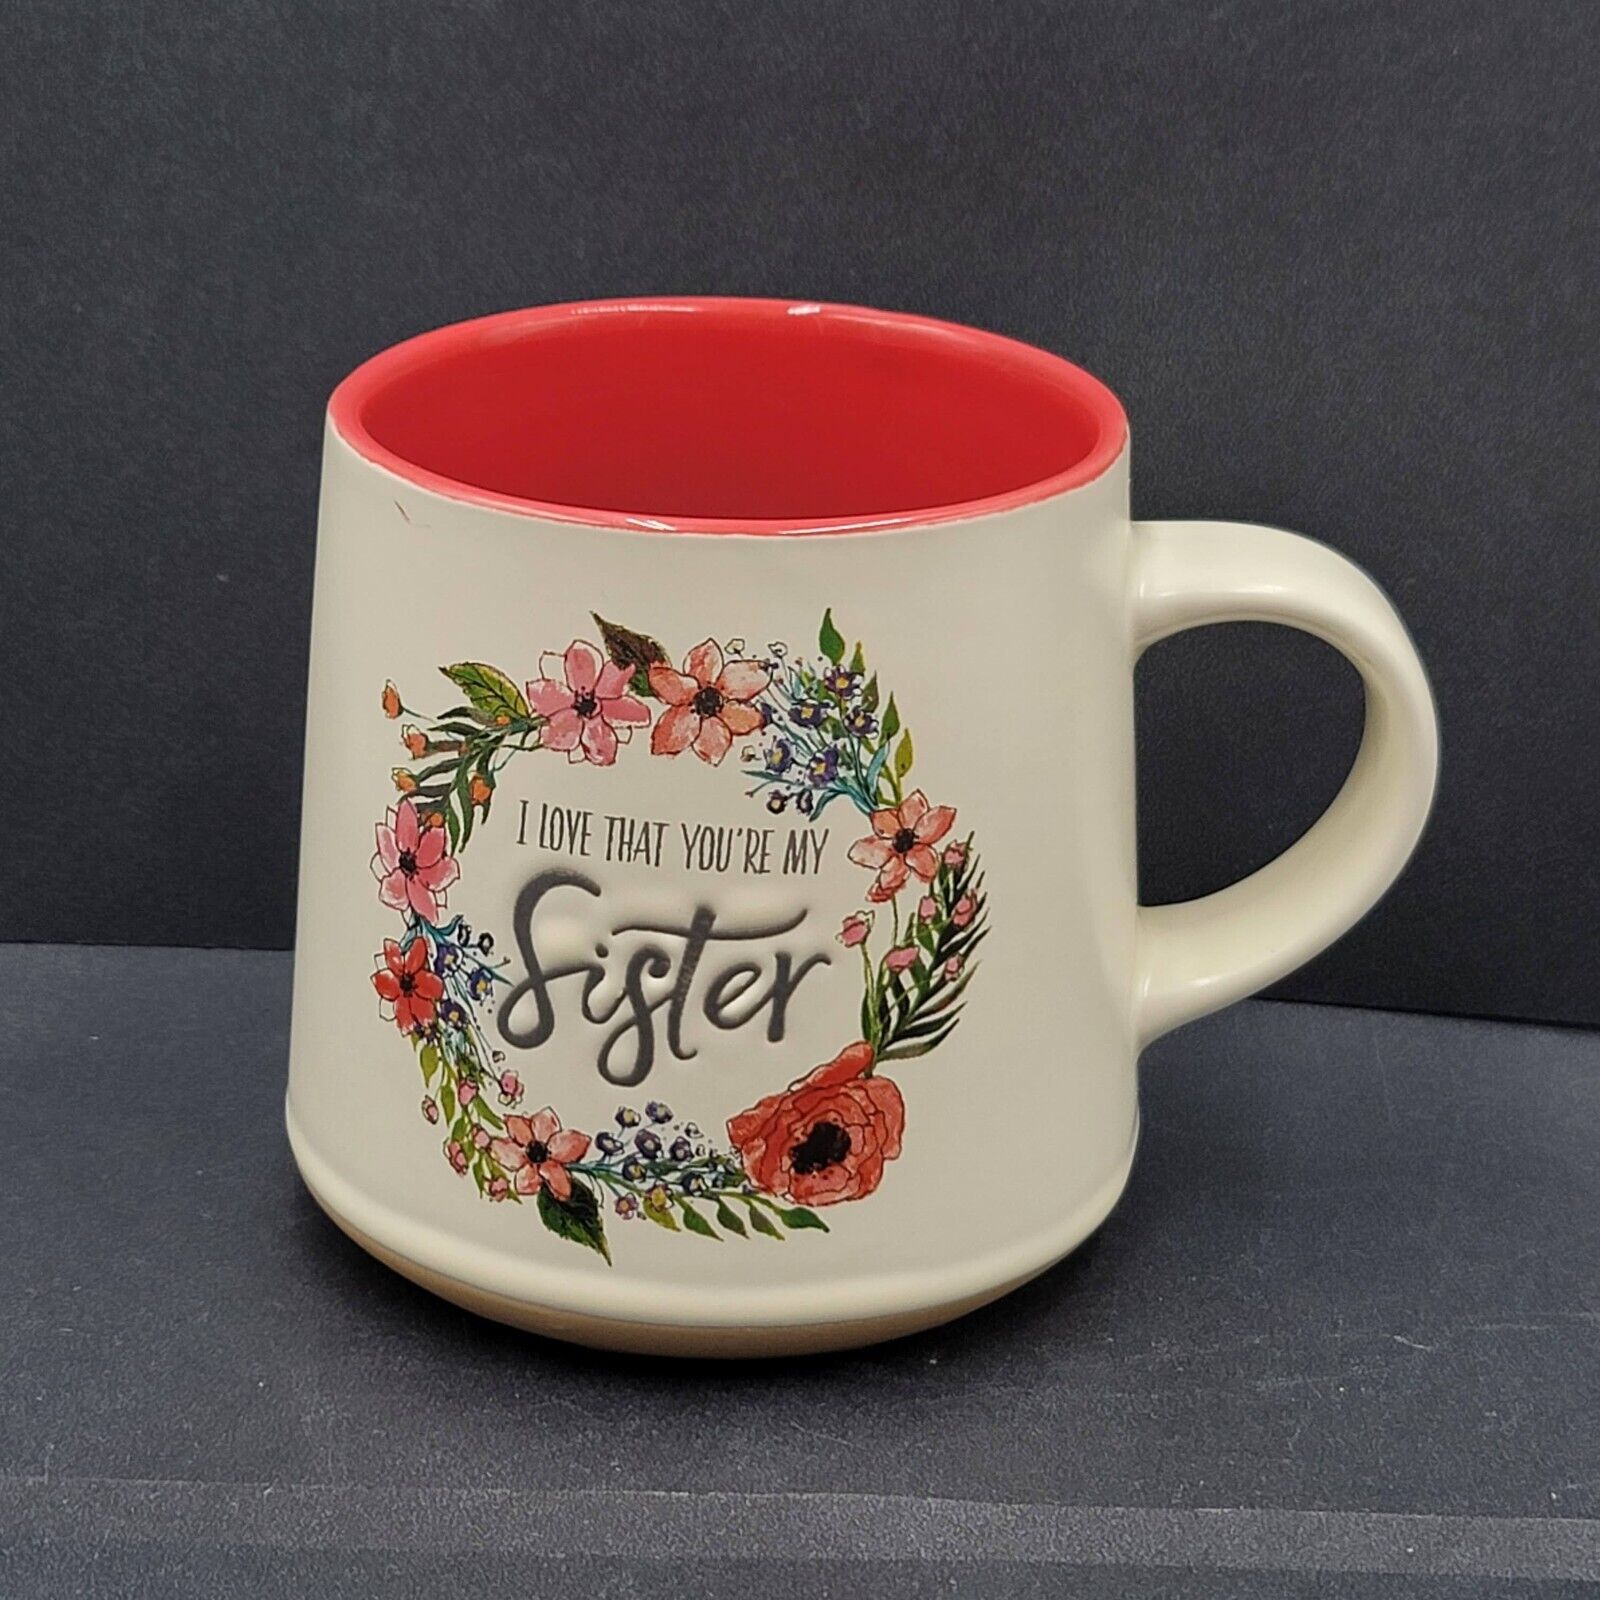 Christian Art Gifts Coffee Mug I Love That Your My Sister Ecclesiastes Flowers